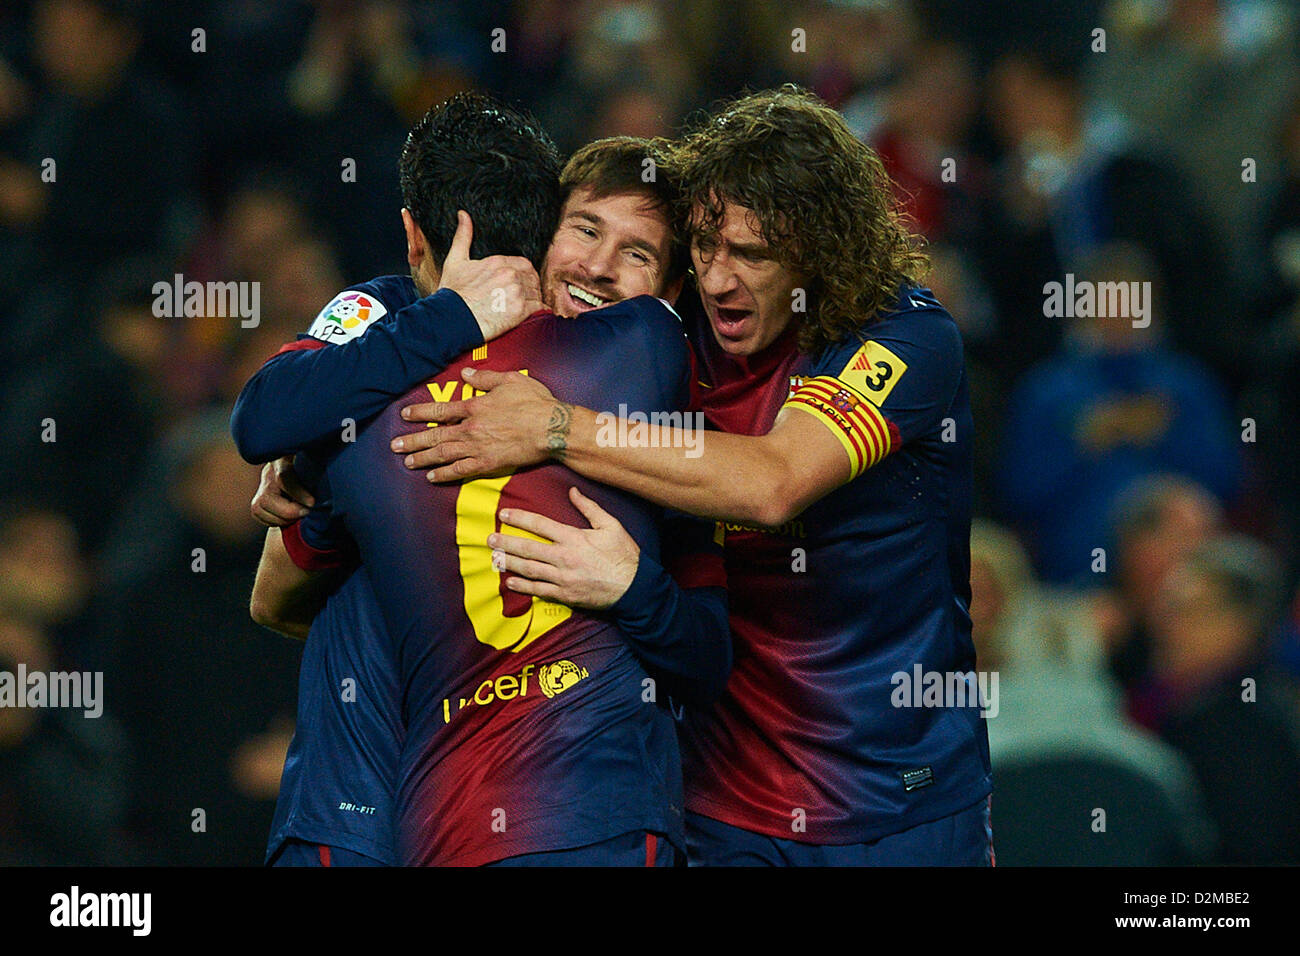 27.01.2013. Mou Camp, Barcelona, Spain.  Lionel Messi (FC Barcelona) celebrates with his teammates Xavi Hernandez (FC Barcelona) and Carles Puyol (FC Barcelona), during the  La Liga soccer match between FC Barcelona and CA Osasuna, at the Camp Nou stadium in Barcelona, Spain Stock Photo